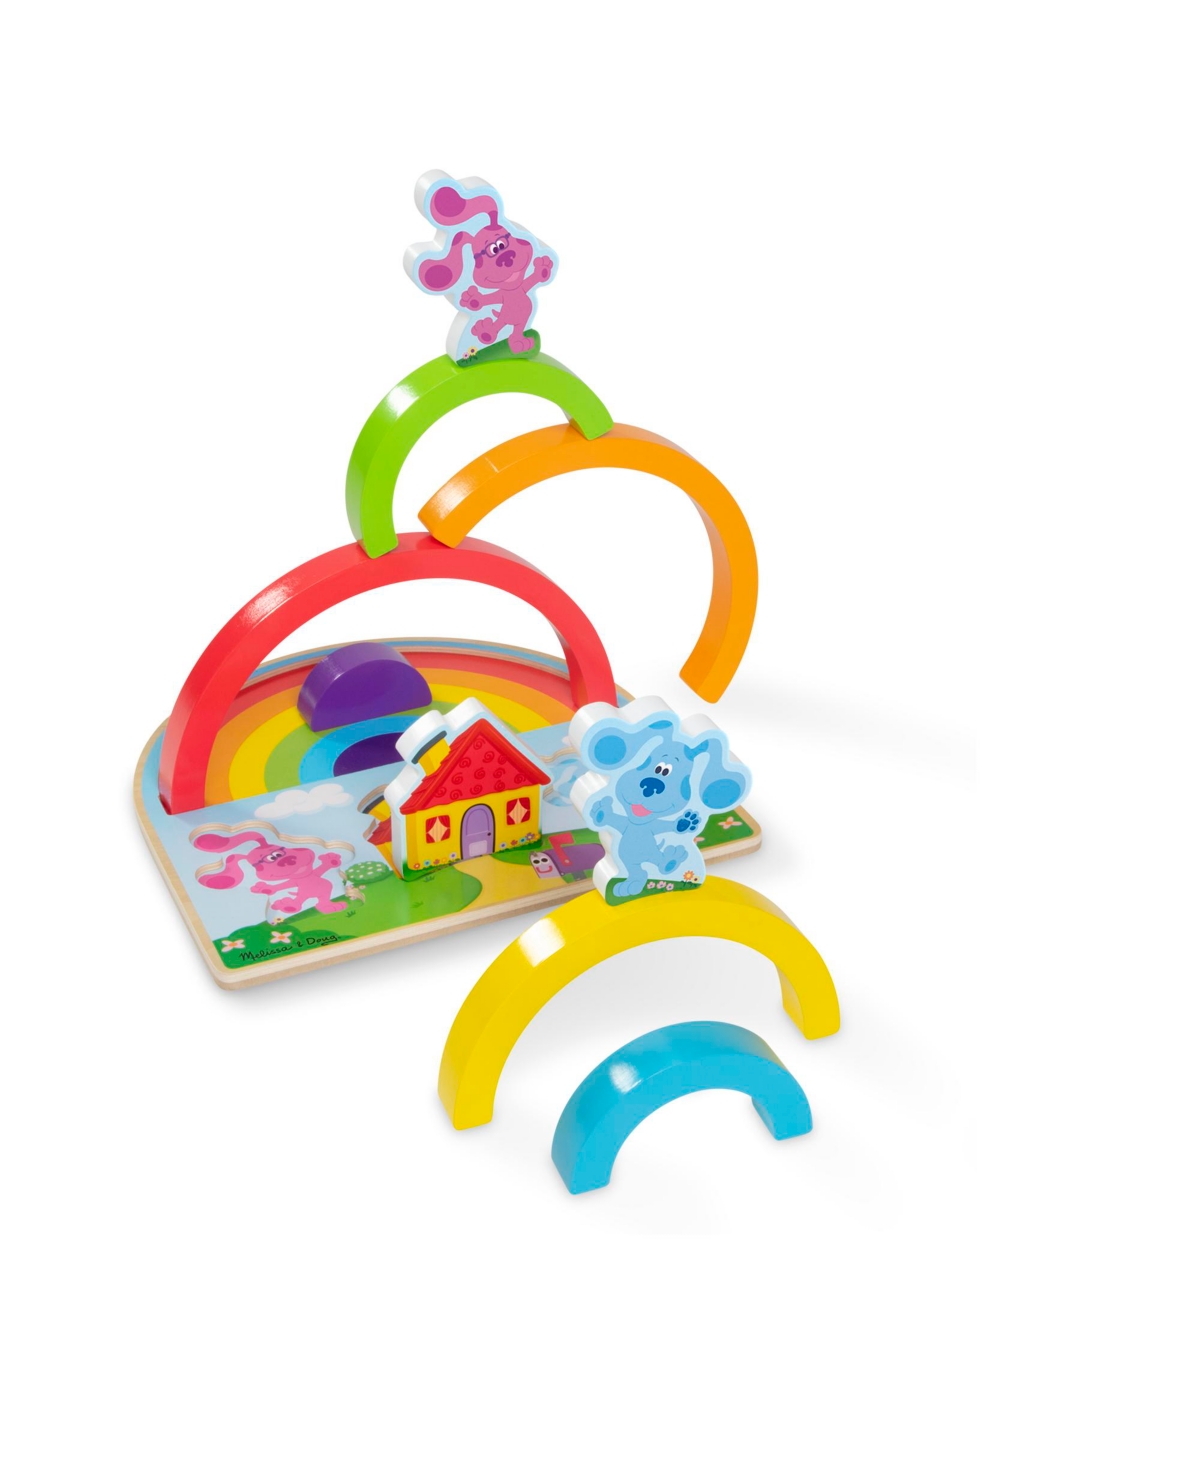 Melissa & Doug Kids' Blues Clues Rainbow Stacker Puzzle, Set Of 9 In No Color